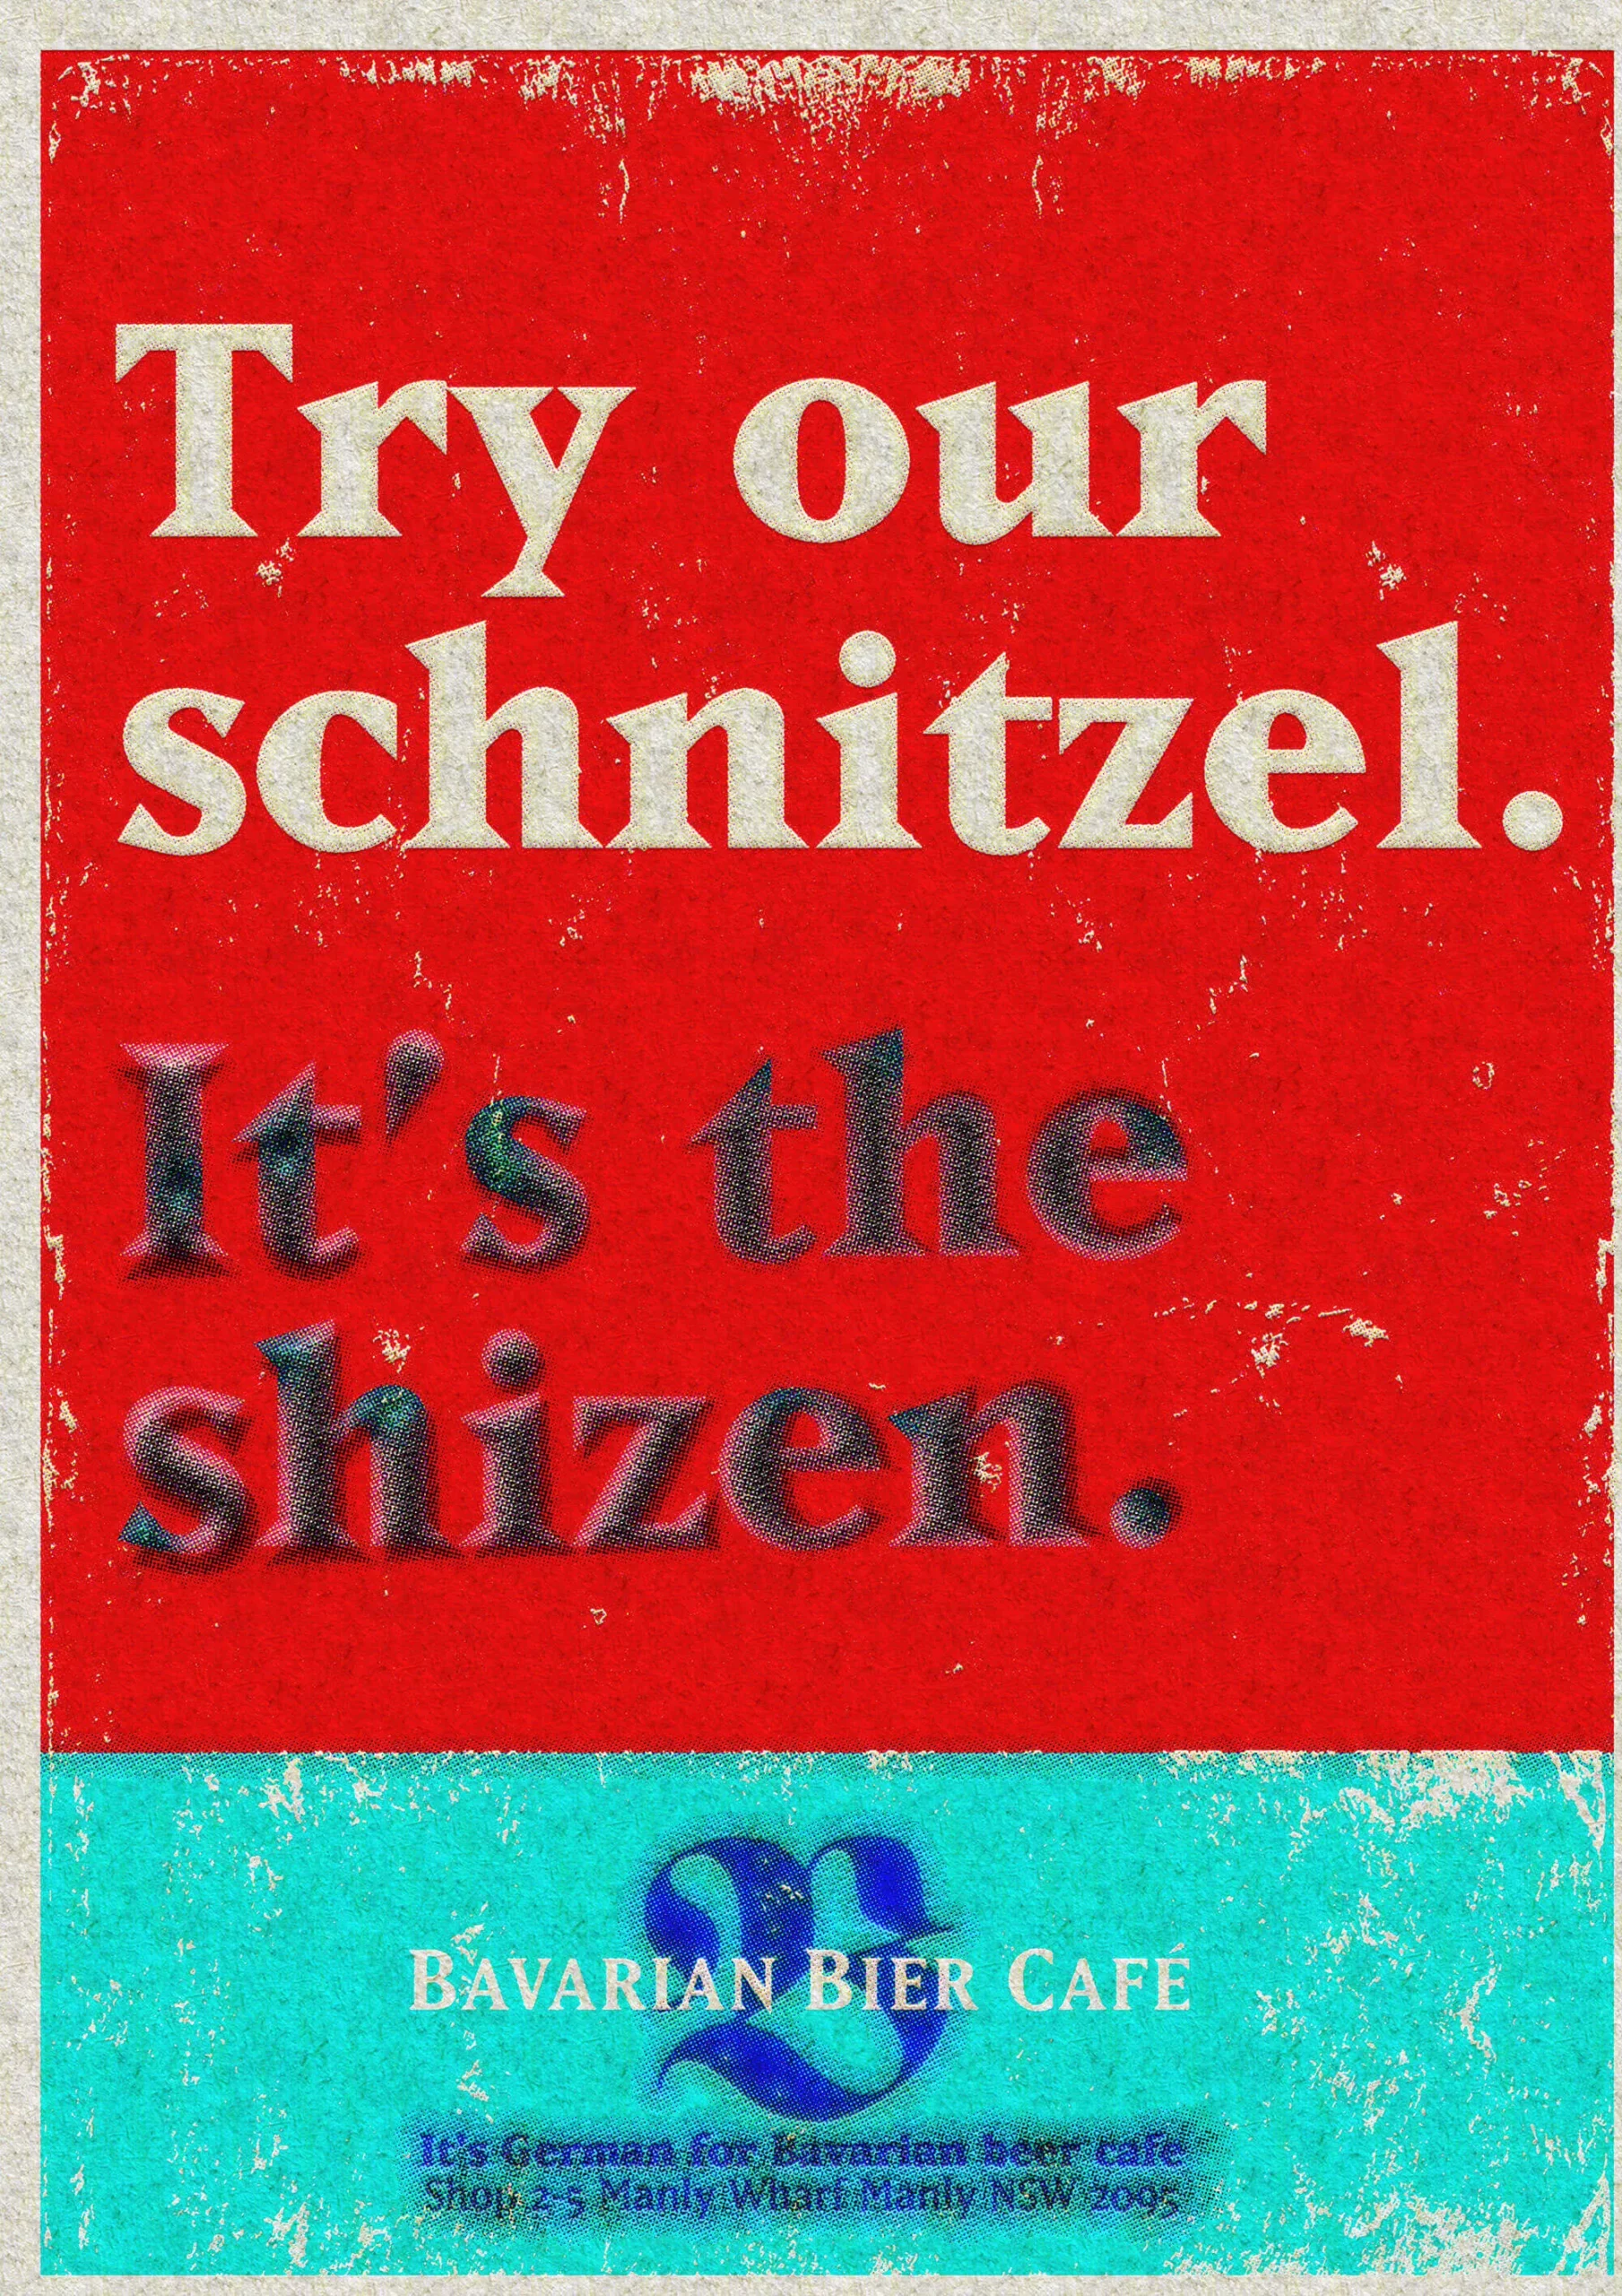 An advert for a Bavarian Bier Café that says "Try our schnitzel. It's the shizen."